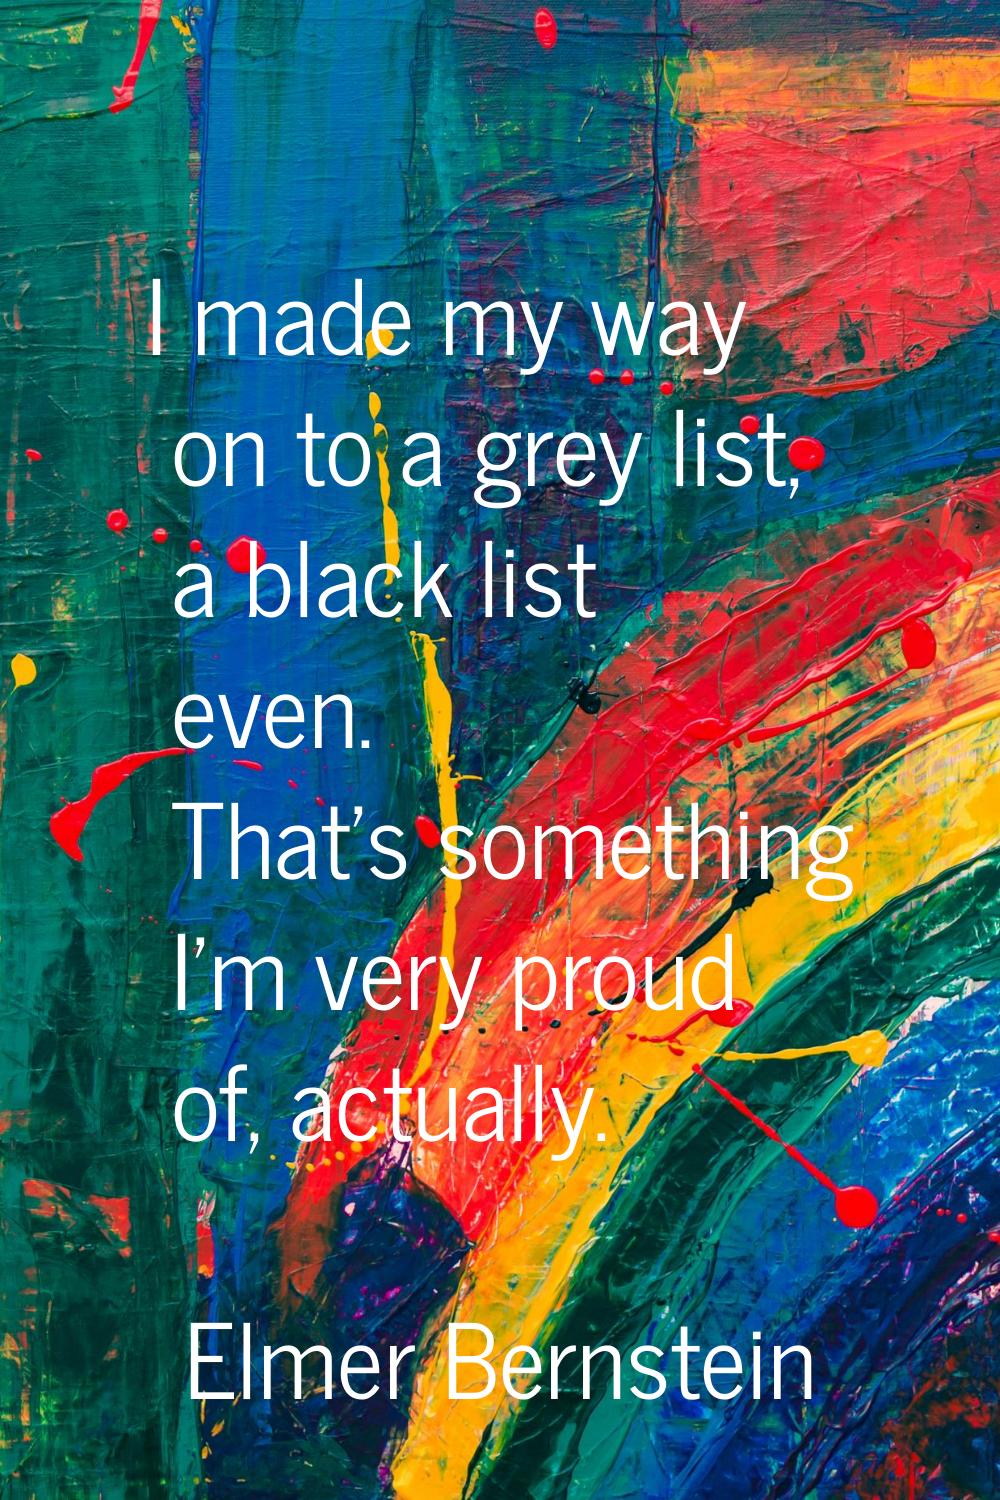 I made my way on to a grey list, a black list even. That's something I'm very proud of, actually.